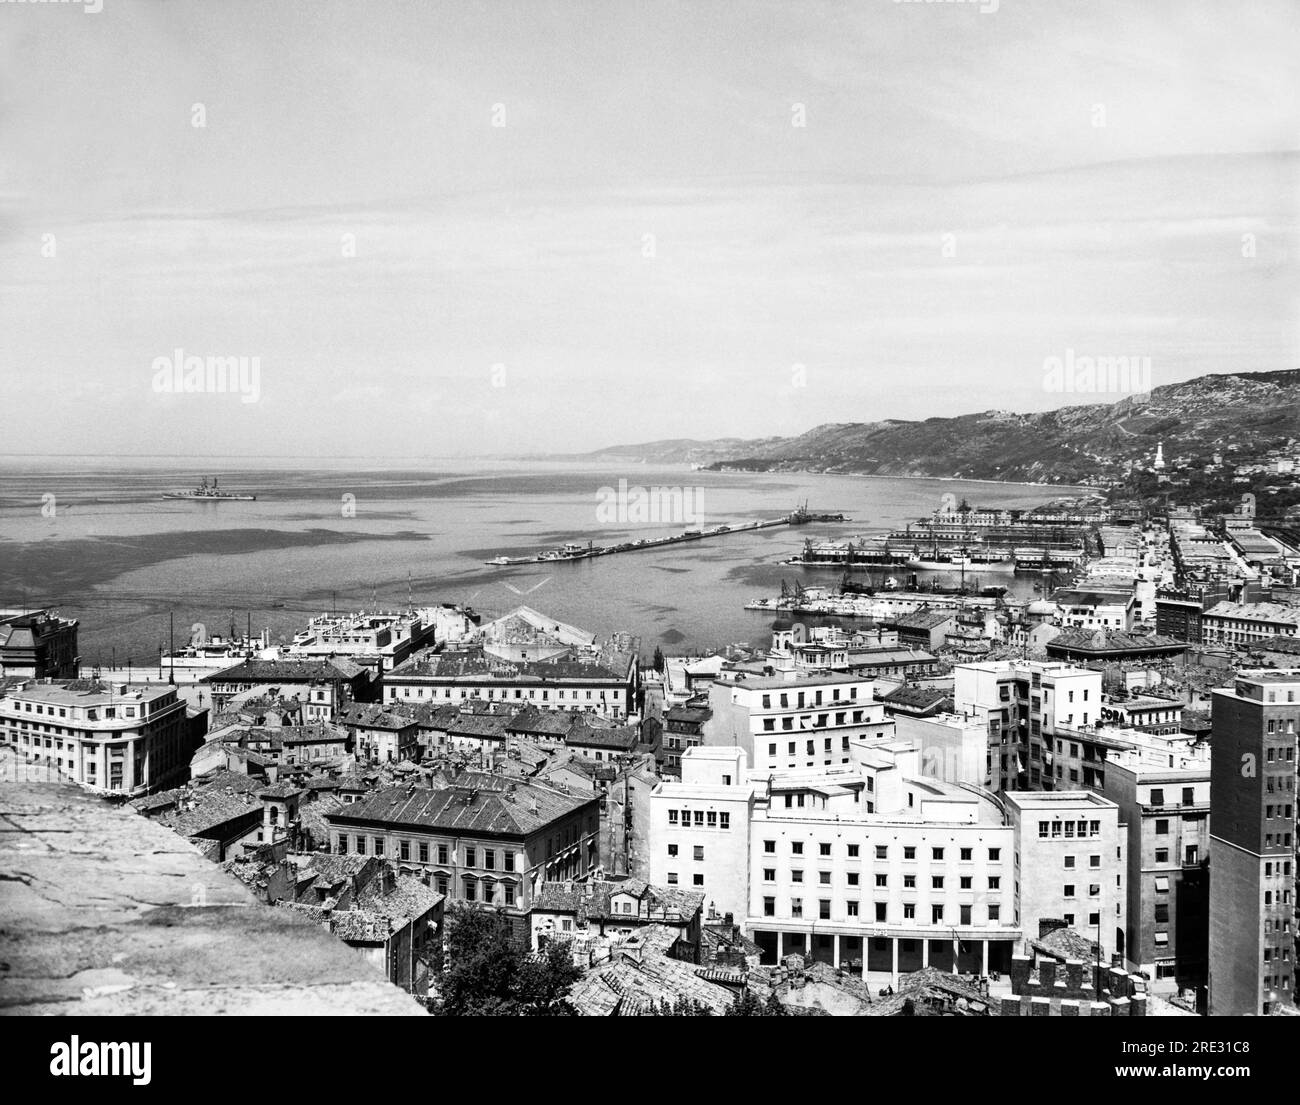 Trieste, Italy:  May 16, 1947 The Adriatic harbor of the Free Territory of Trieste. The Paris Peace treaty of February, 1947 established its independence. Stock Photo